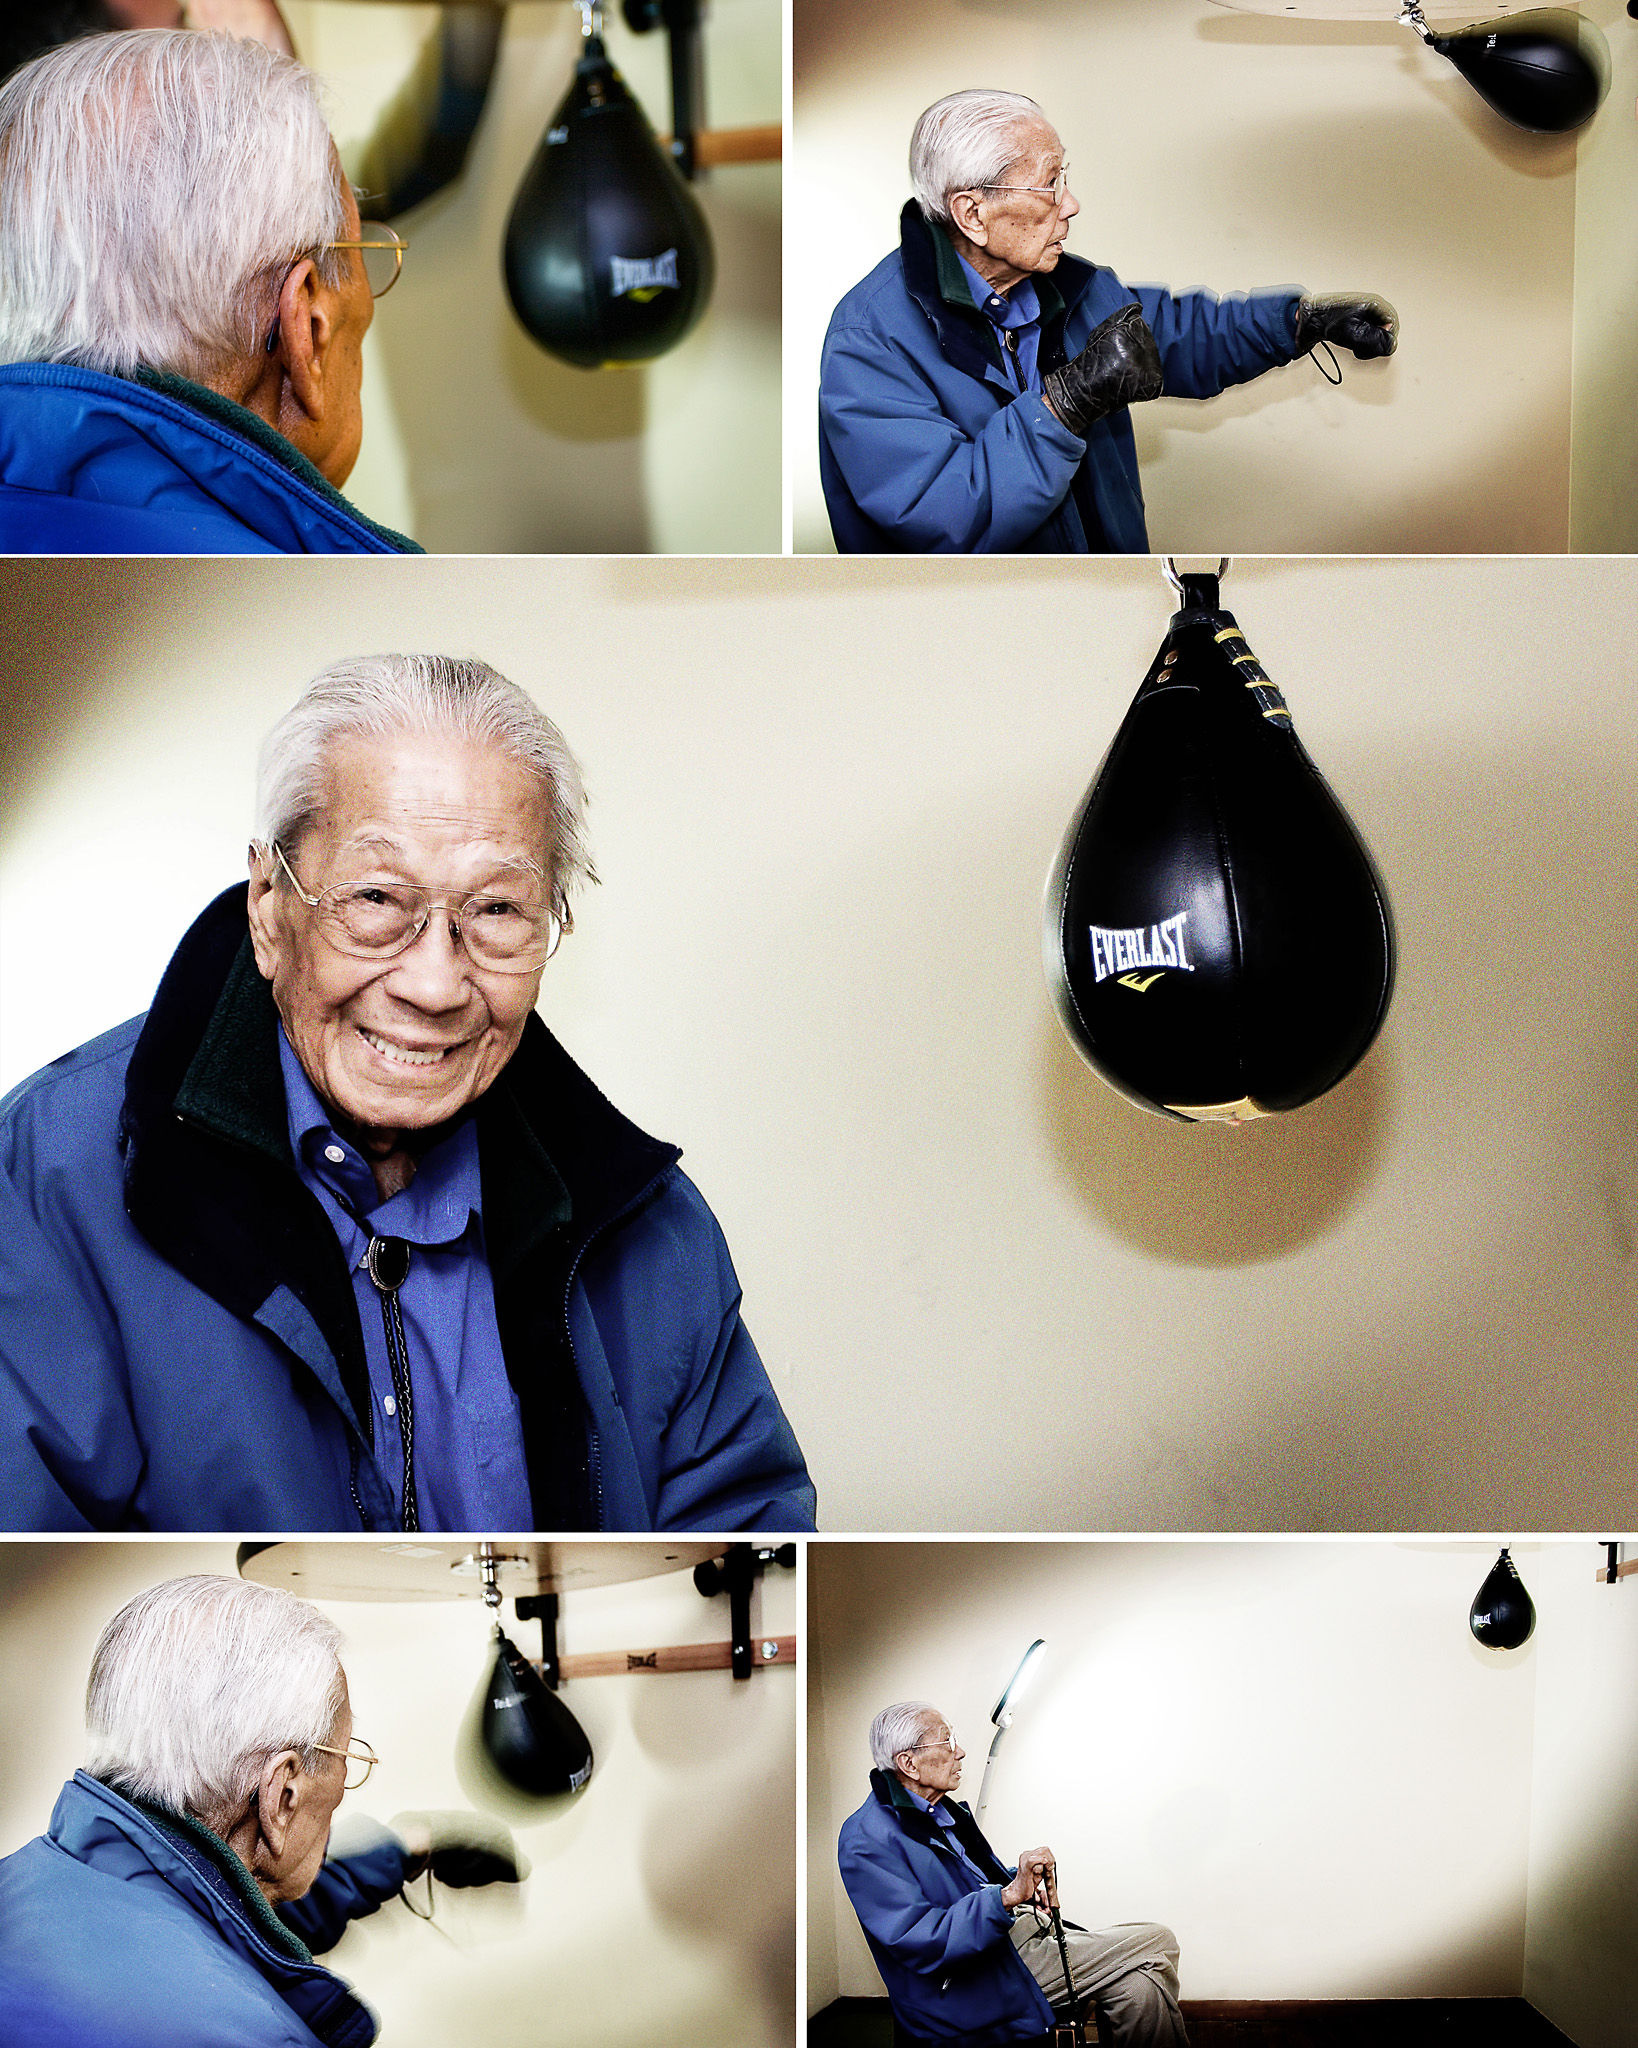 Only four months after Mom died, Dad - at 98 - turned his face to the sun once more and figured he might like to do a little boxing again. We got him set up in my sister's old room.